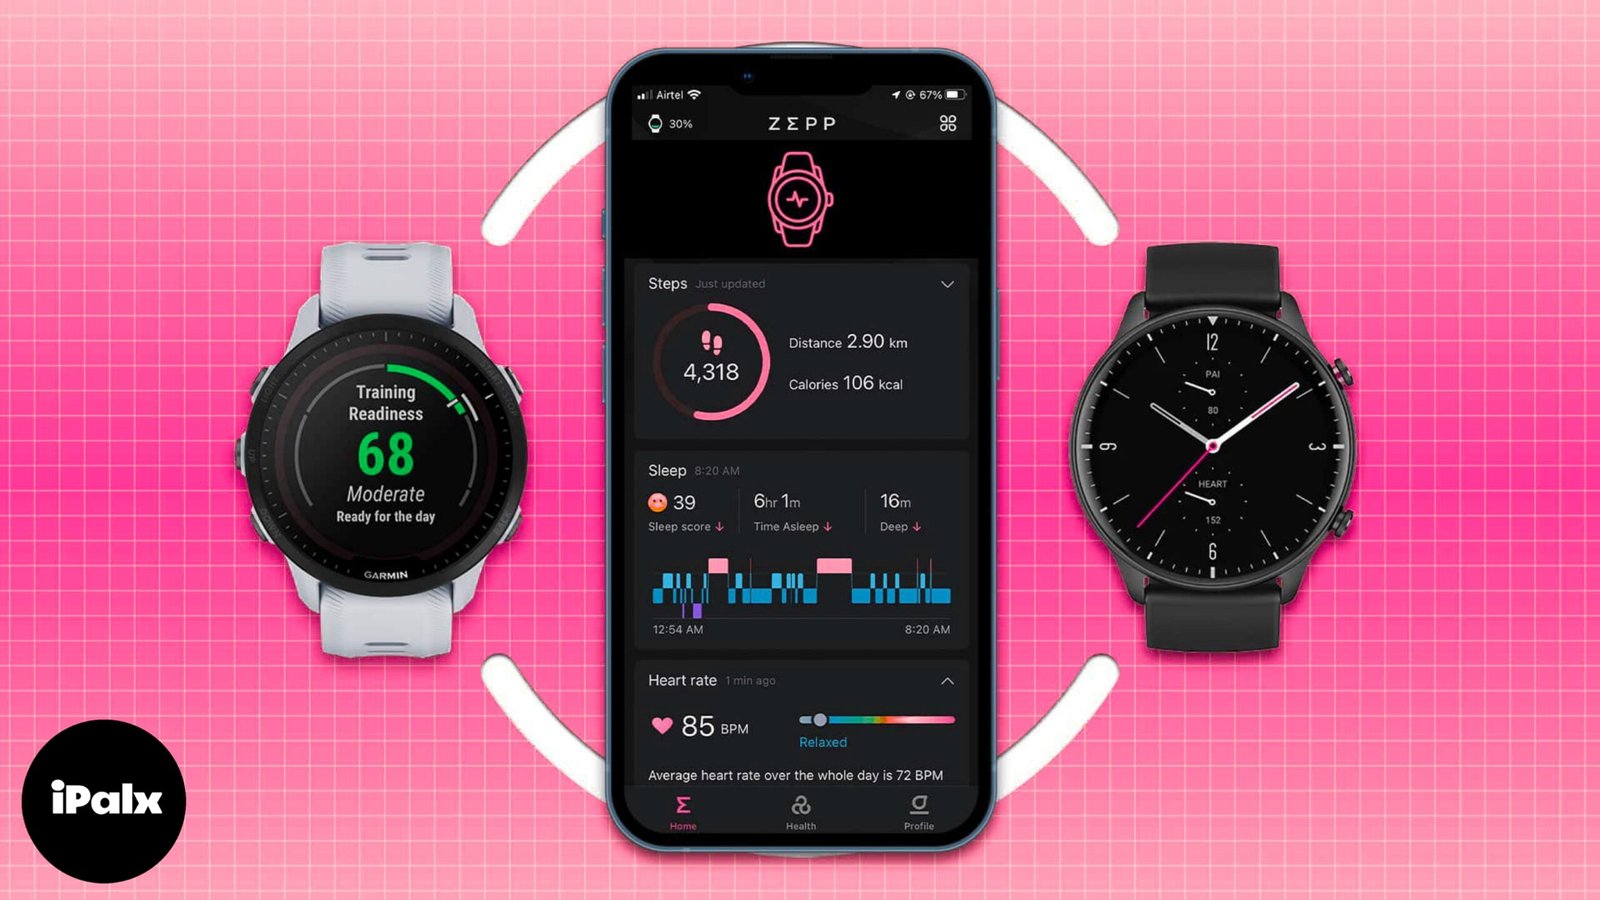 How can I connect my Android Smartwatch to an iPhone?